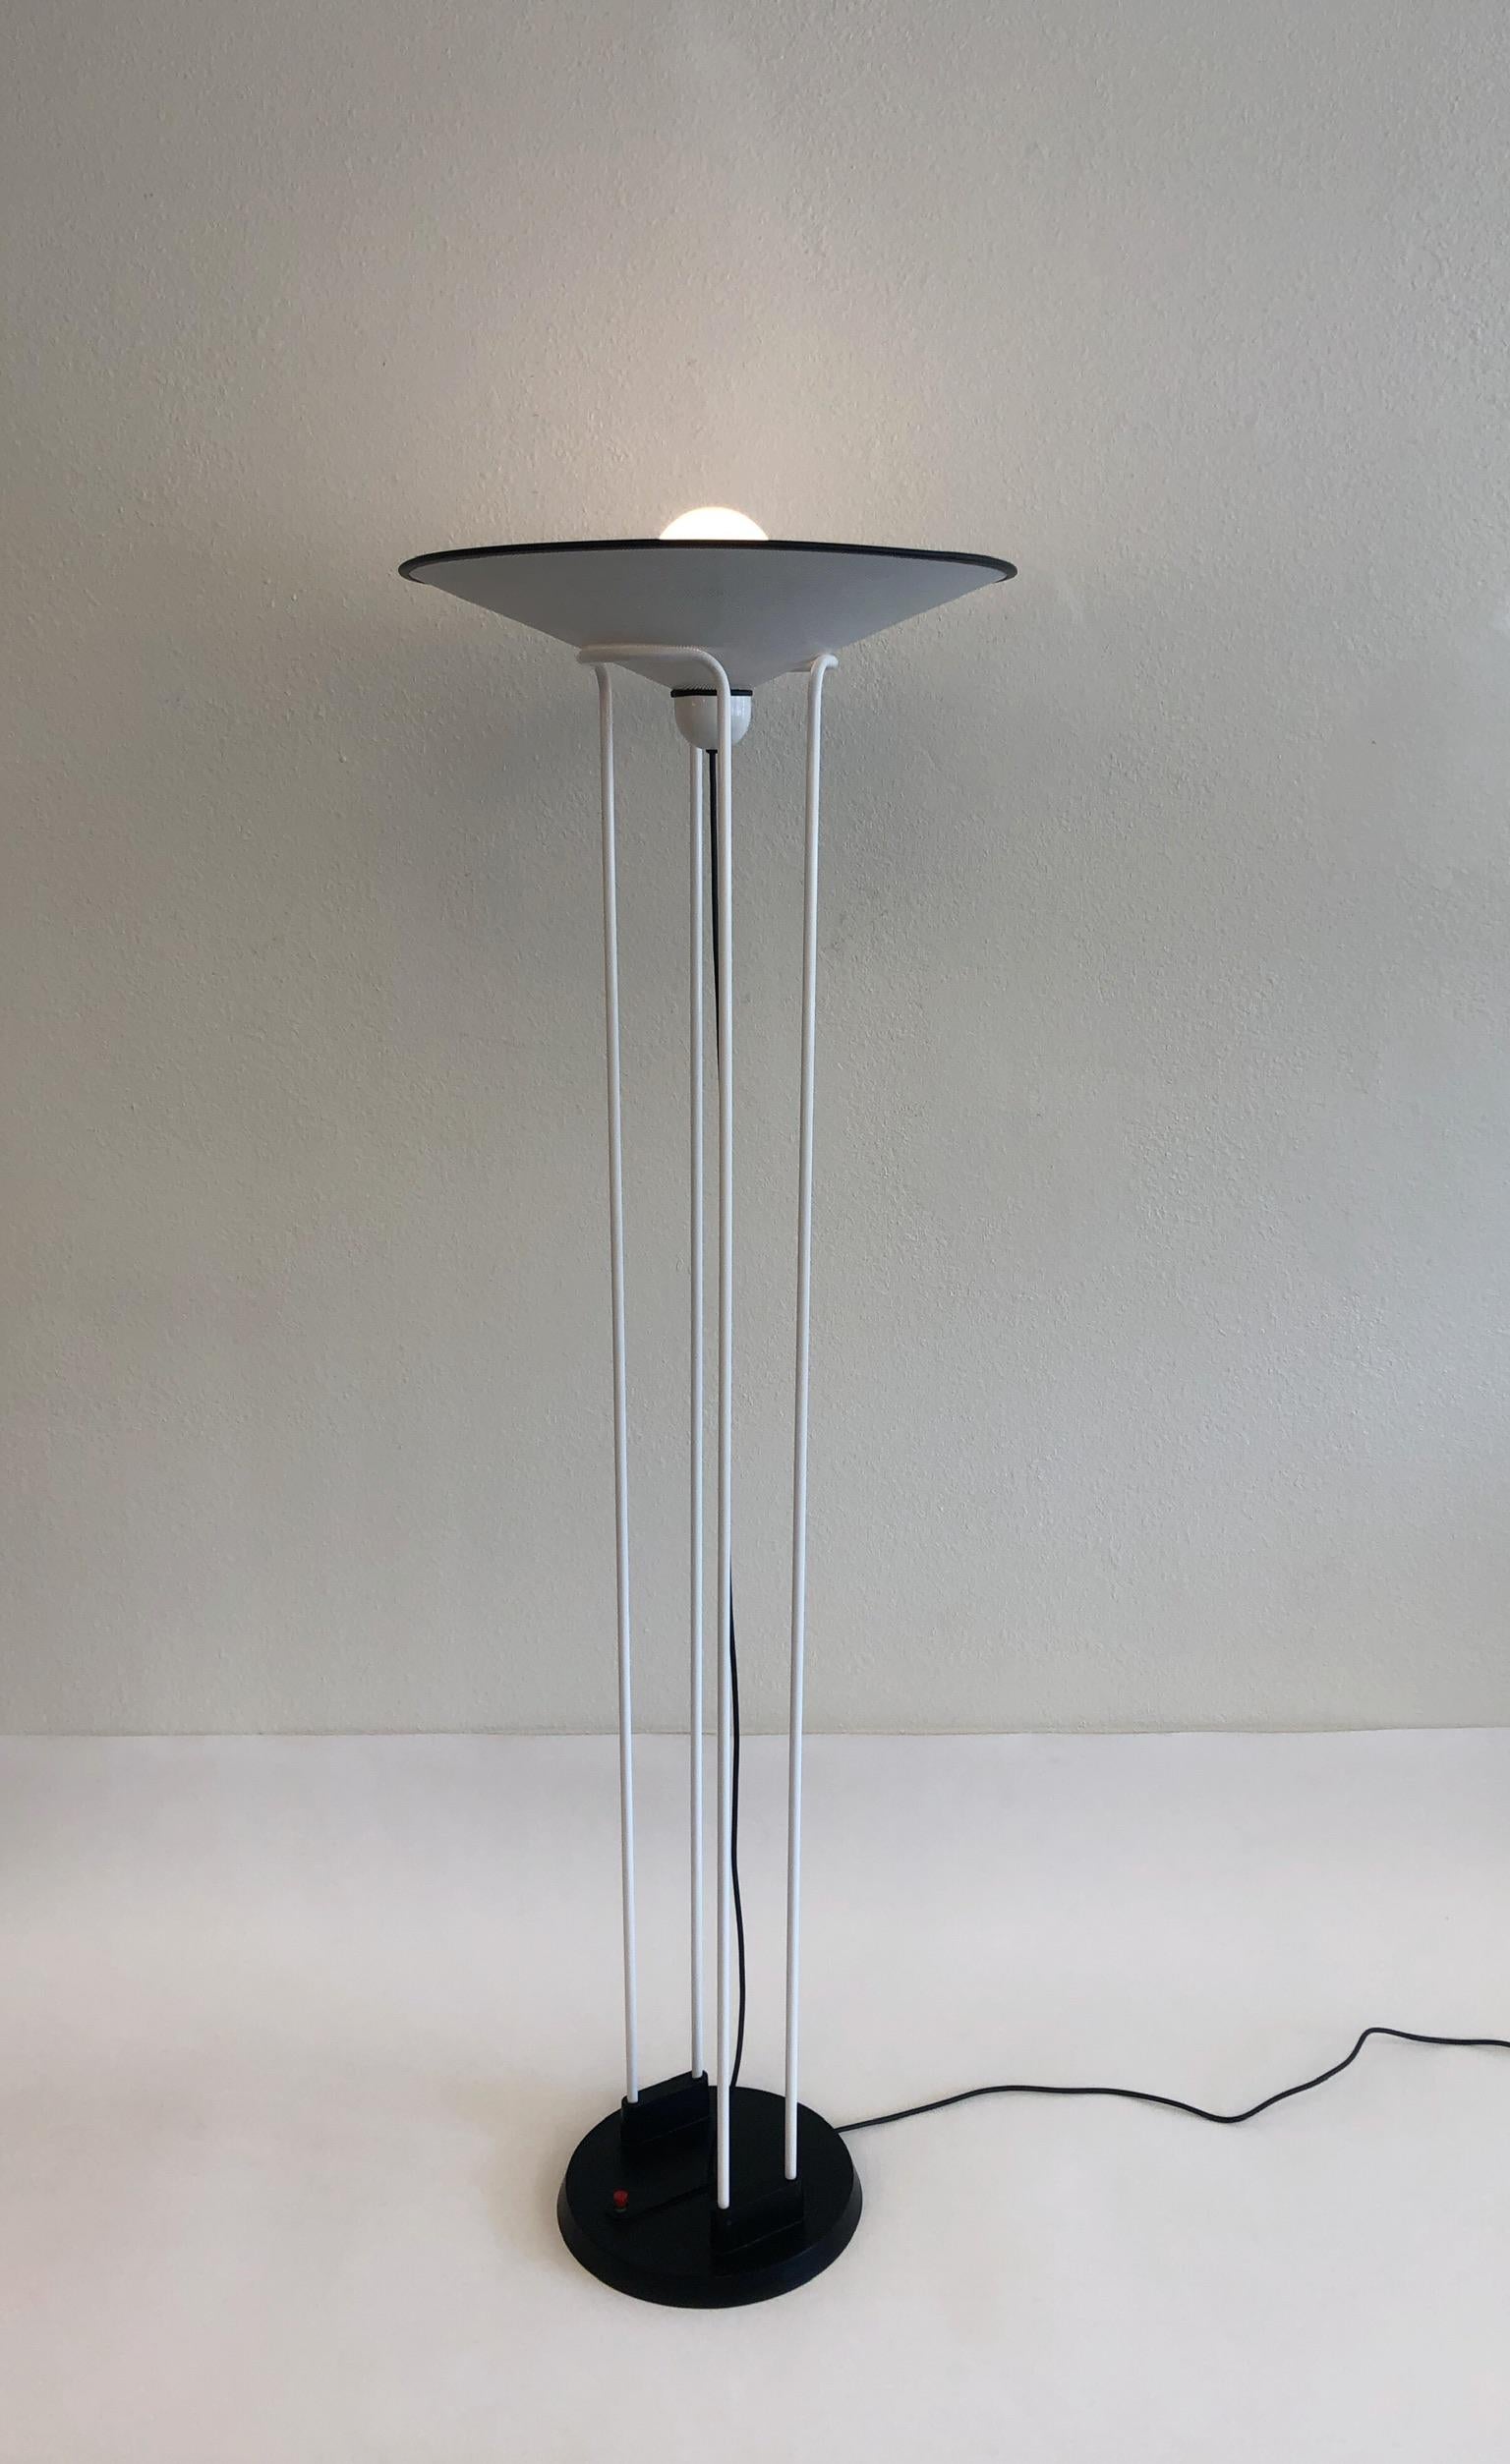 A spectacular Postmodern torchiere floor lamp design by Ron Rezek in the 1980s. The lamp is metal powder coated white and black with a red on/off switch on the base.
Dimensions: 71.75” high 24” diameter.